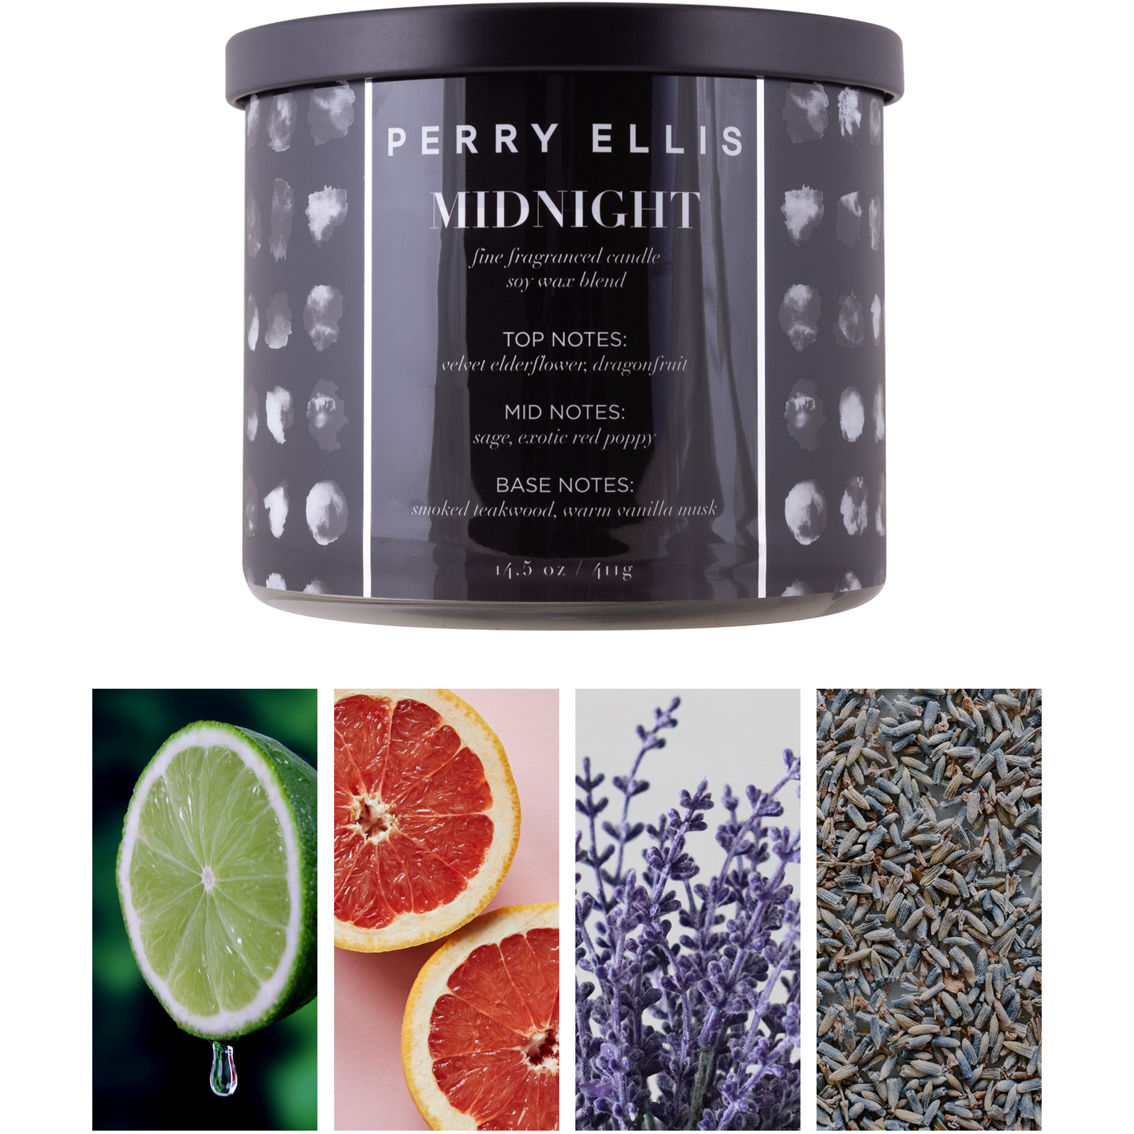 Perry Ellis Midnight Candle - Image 5 of 6